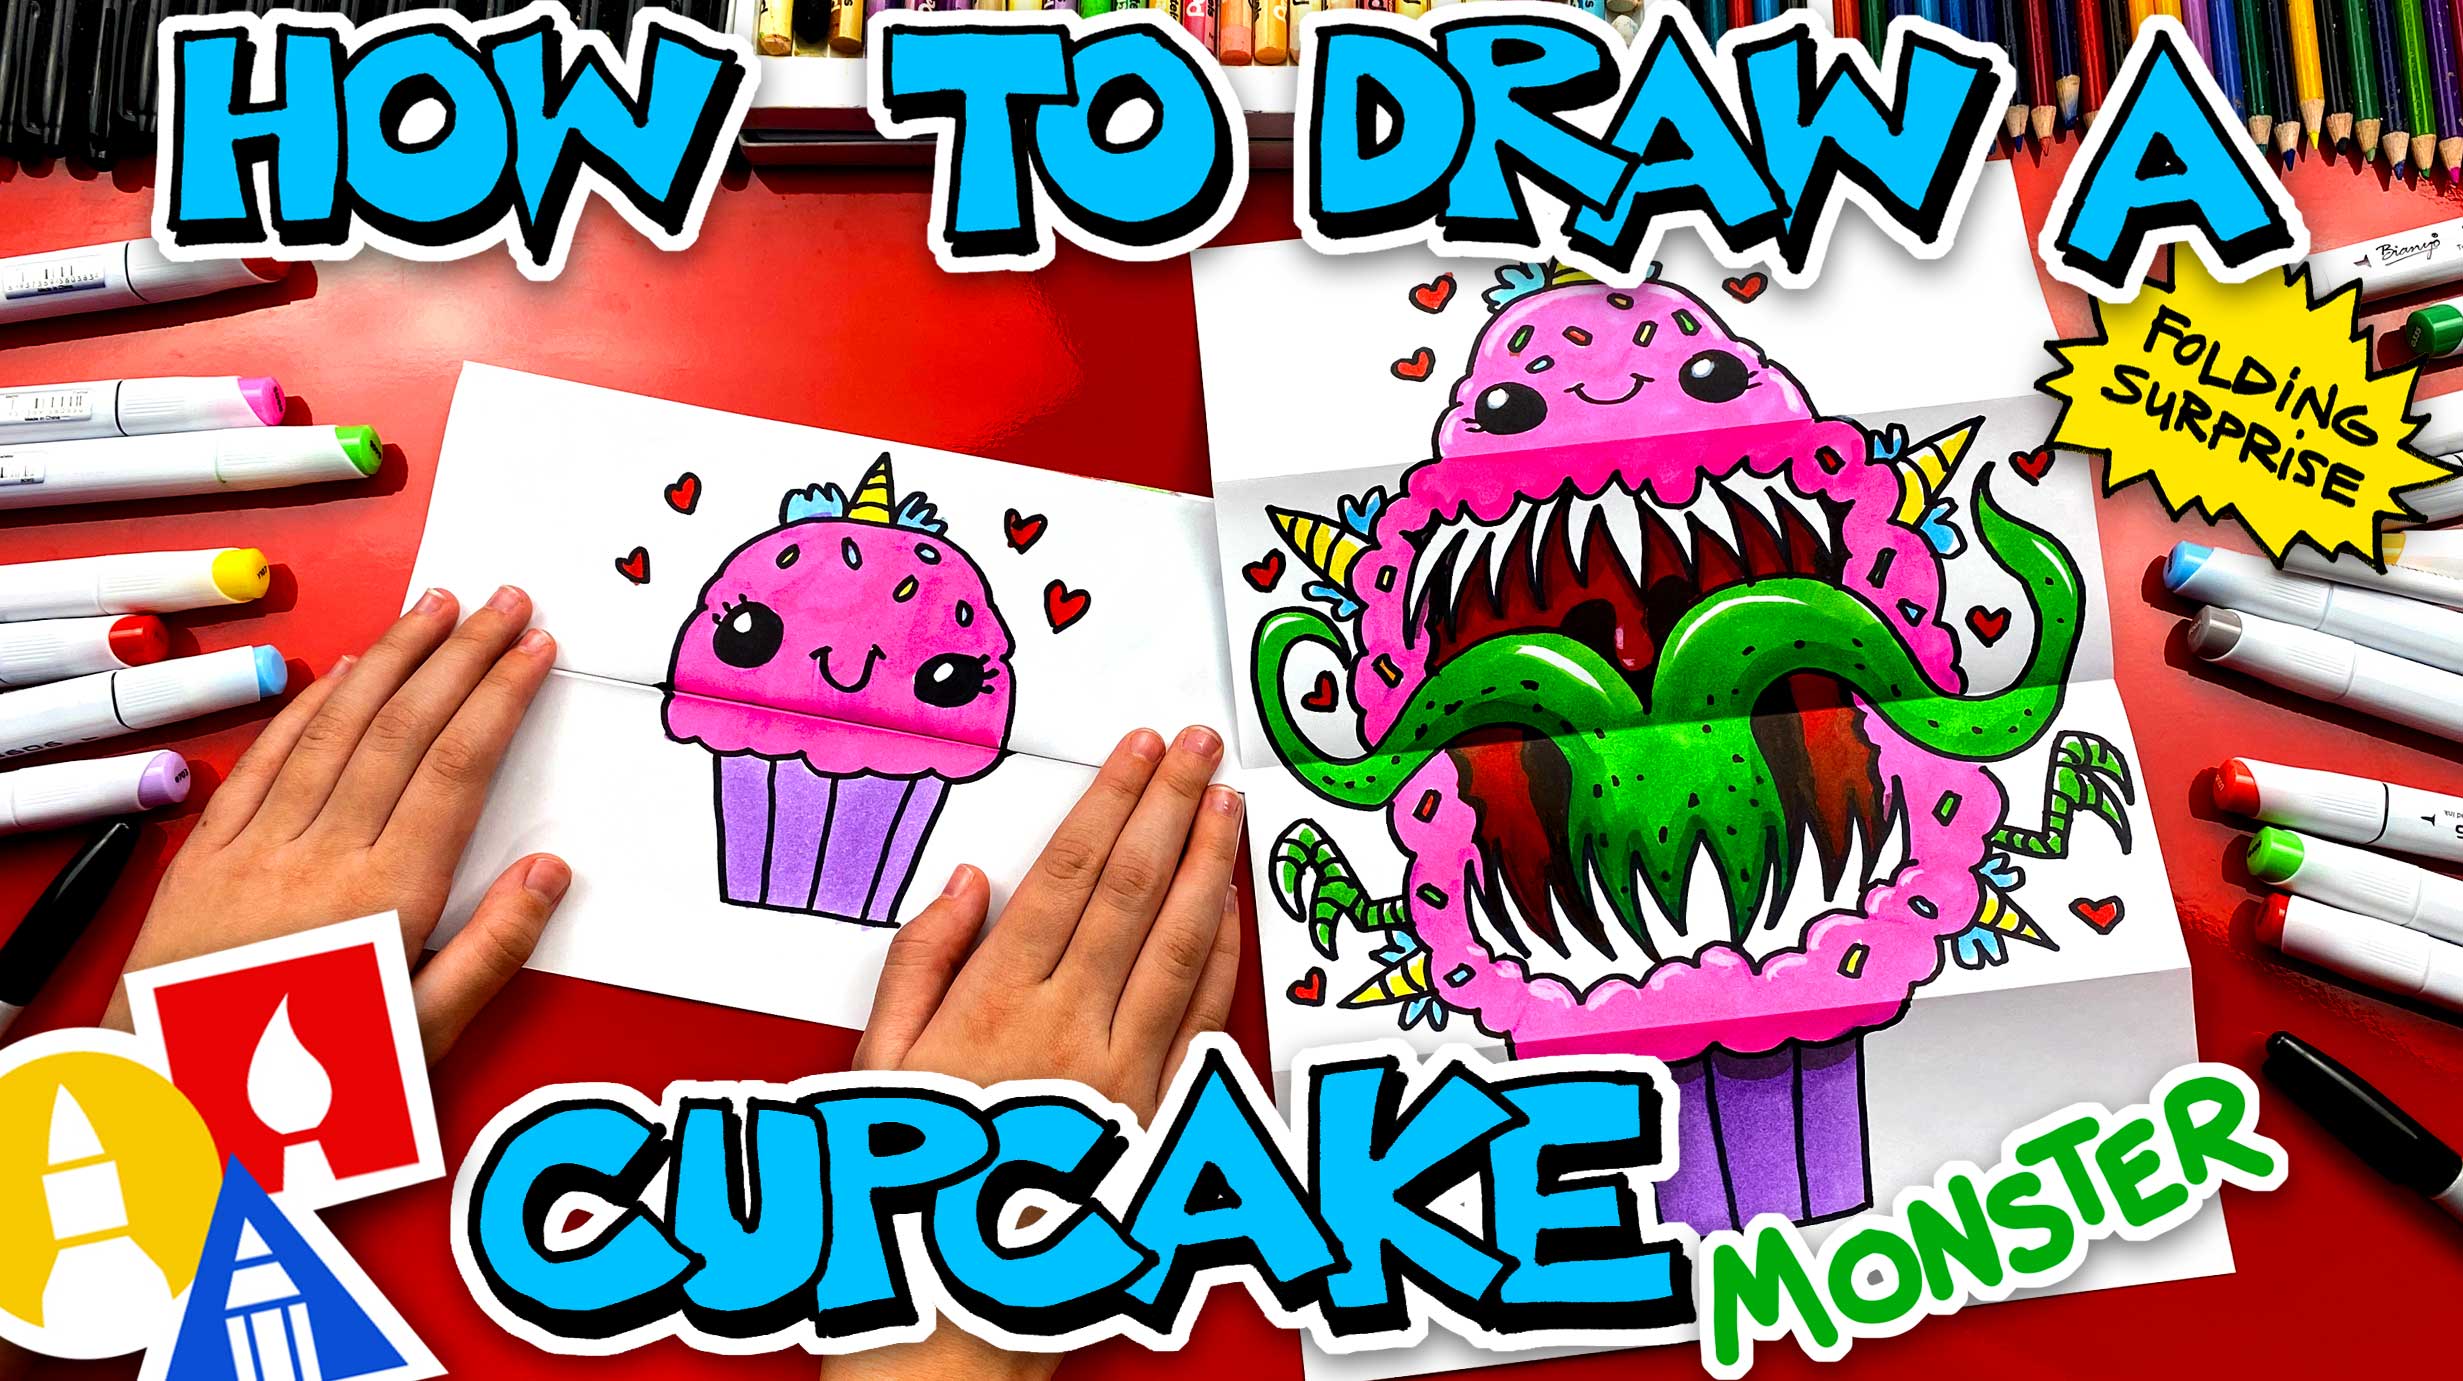 How To Draw A Cute Cupcake Monster Folding Surprise - Art ...